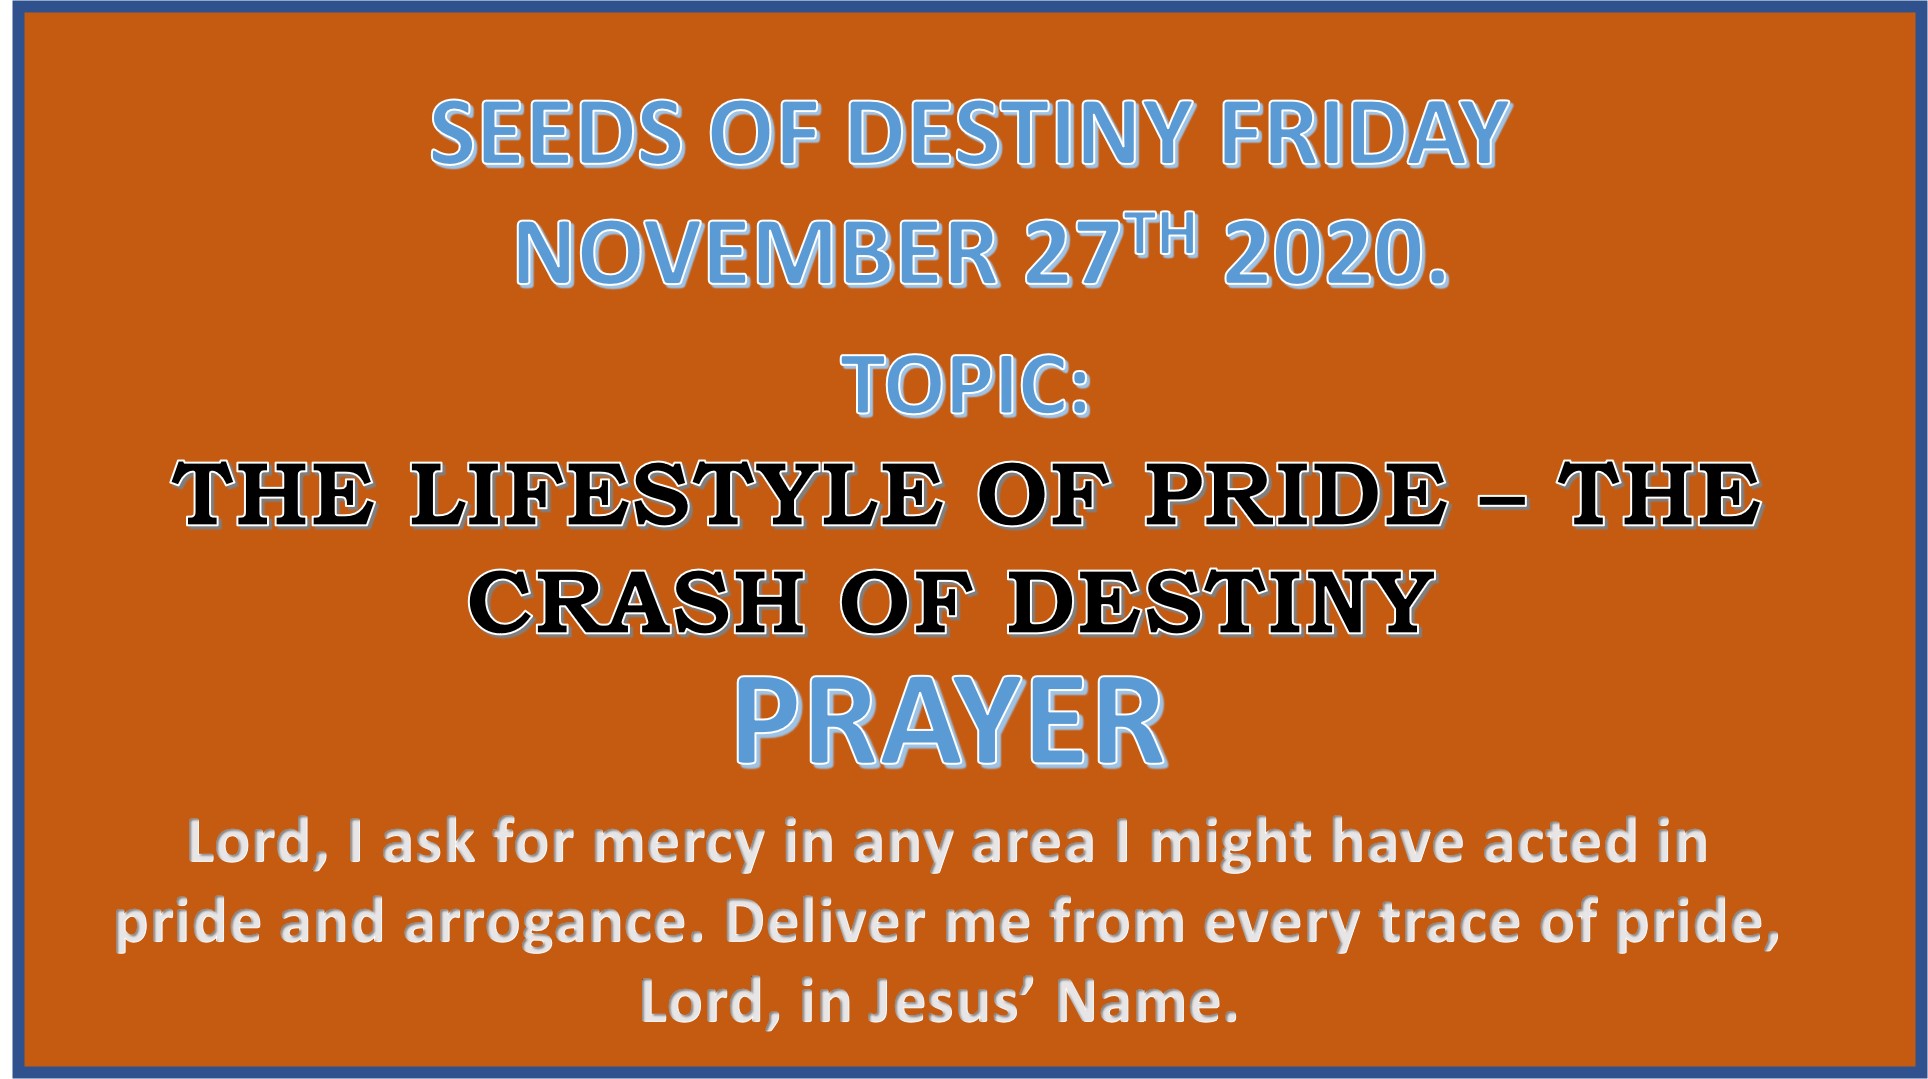 Seeds of Destiny Friday 27th November 2020 by Dr Paul Enenche